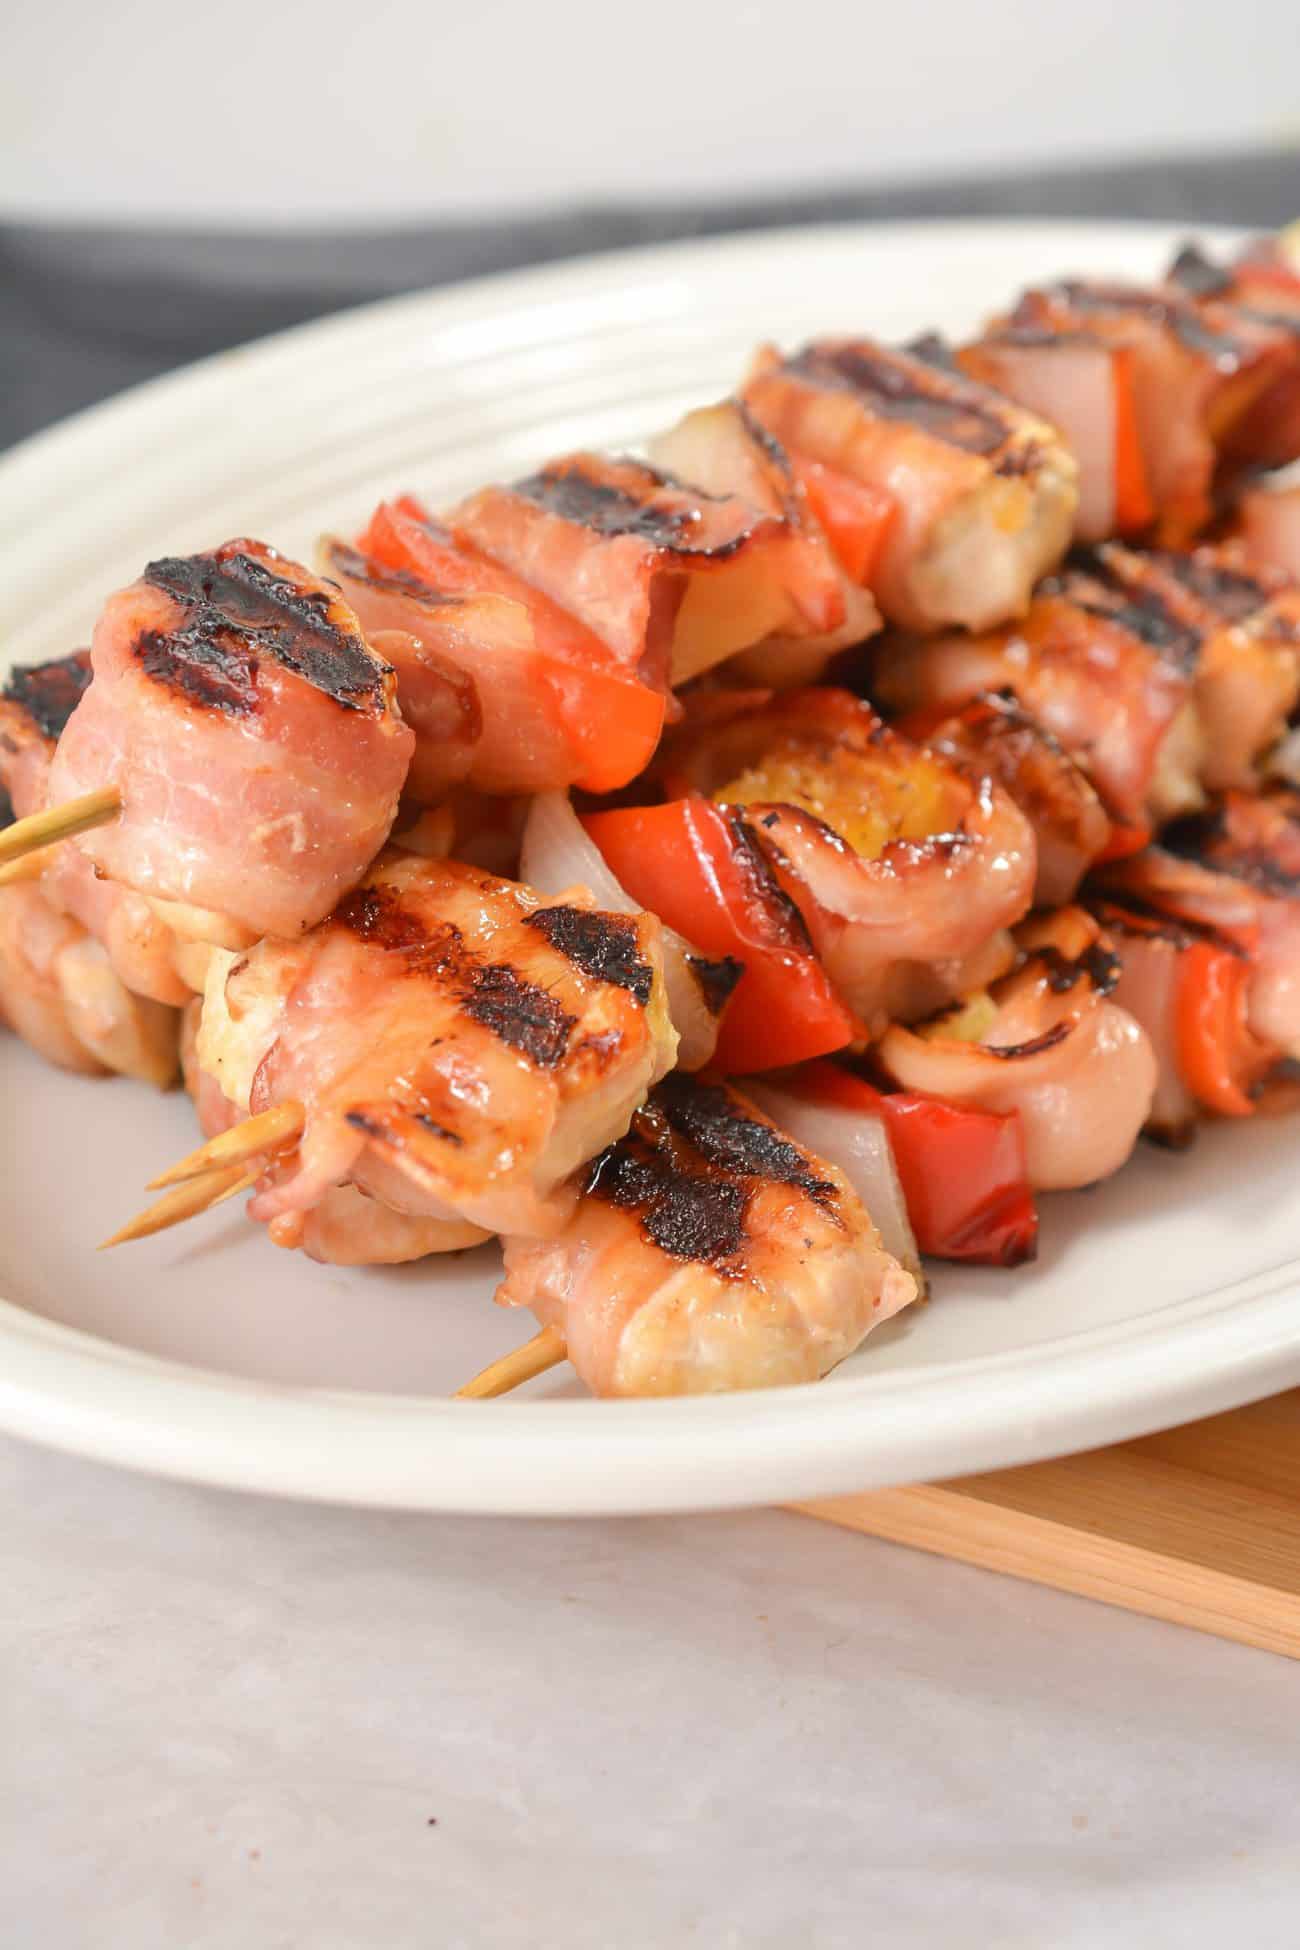 Chicken, Bacon, Pineapple Kebabs